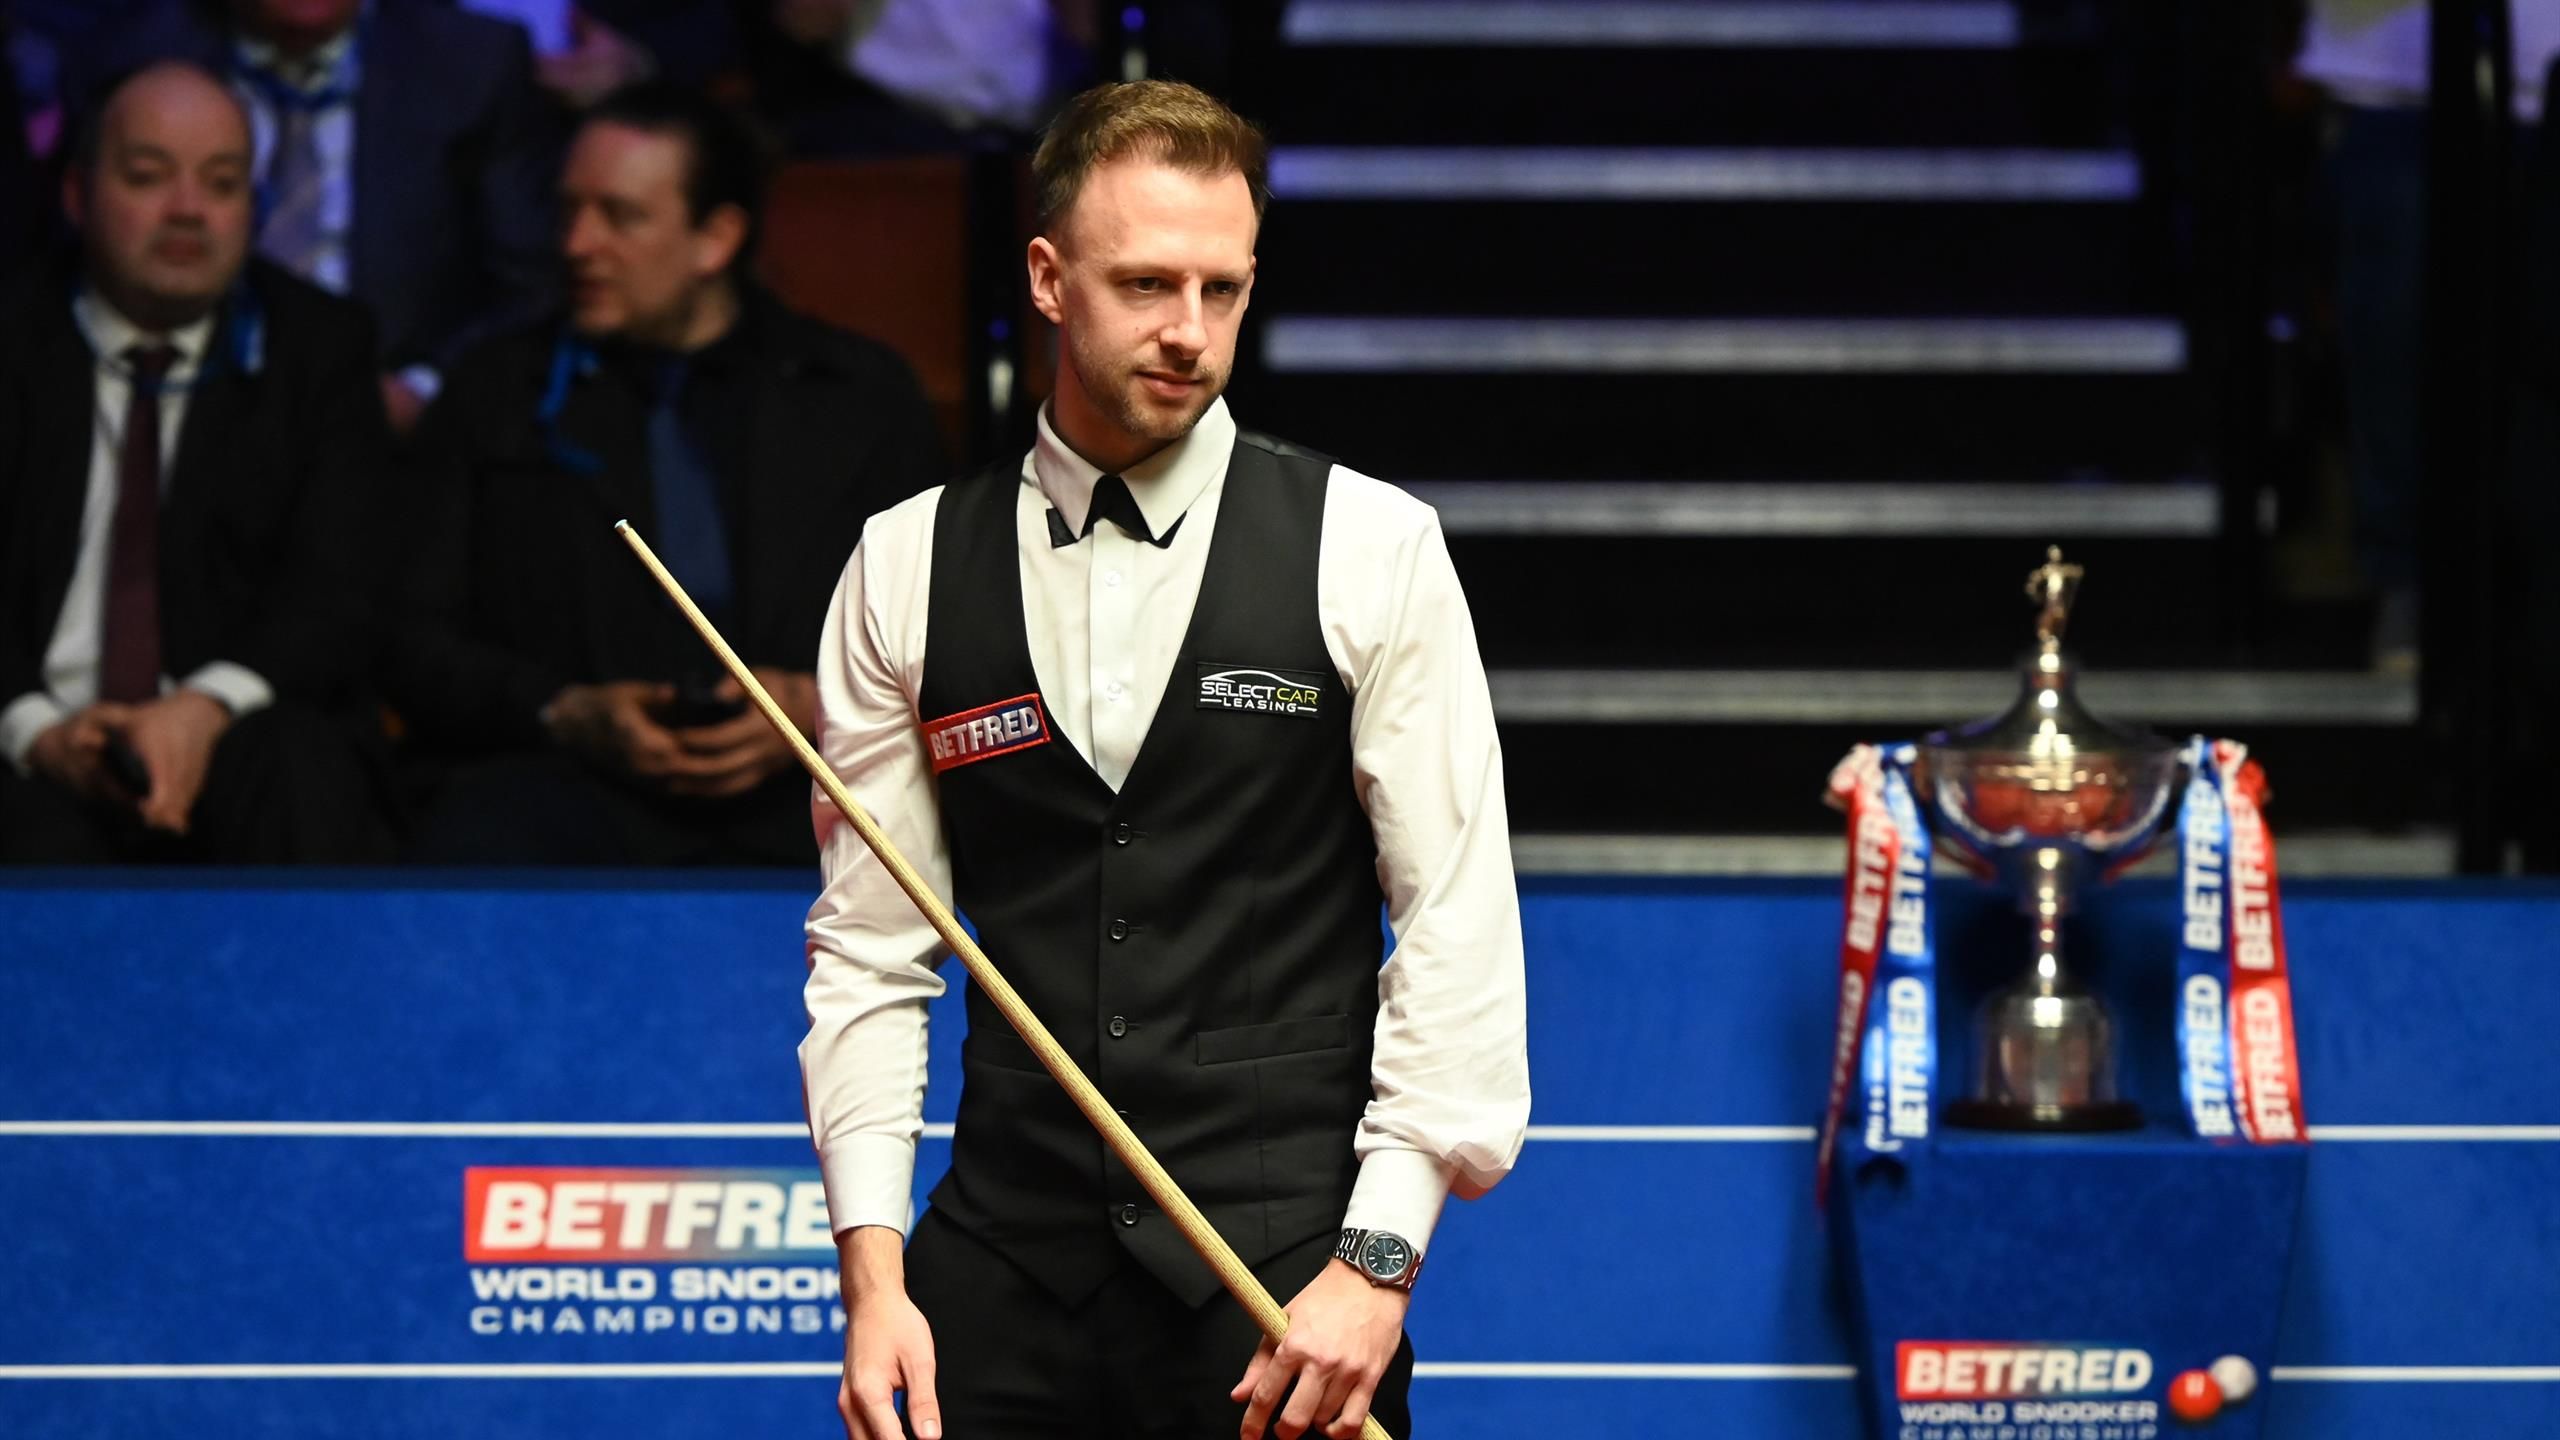 World Snooker Championship 2022 - Even in defeat to Ronnie OSullivan, Judd Trump has a path to greatness